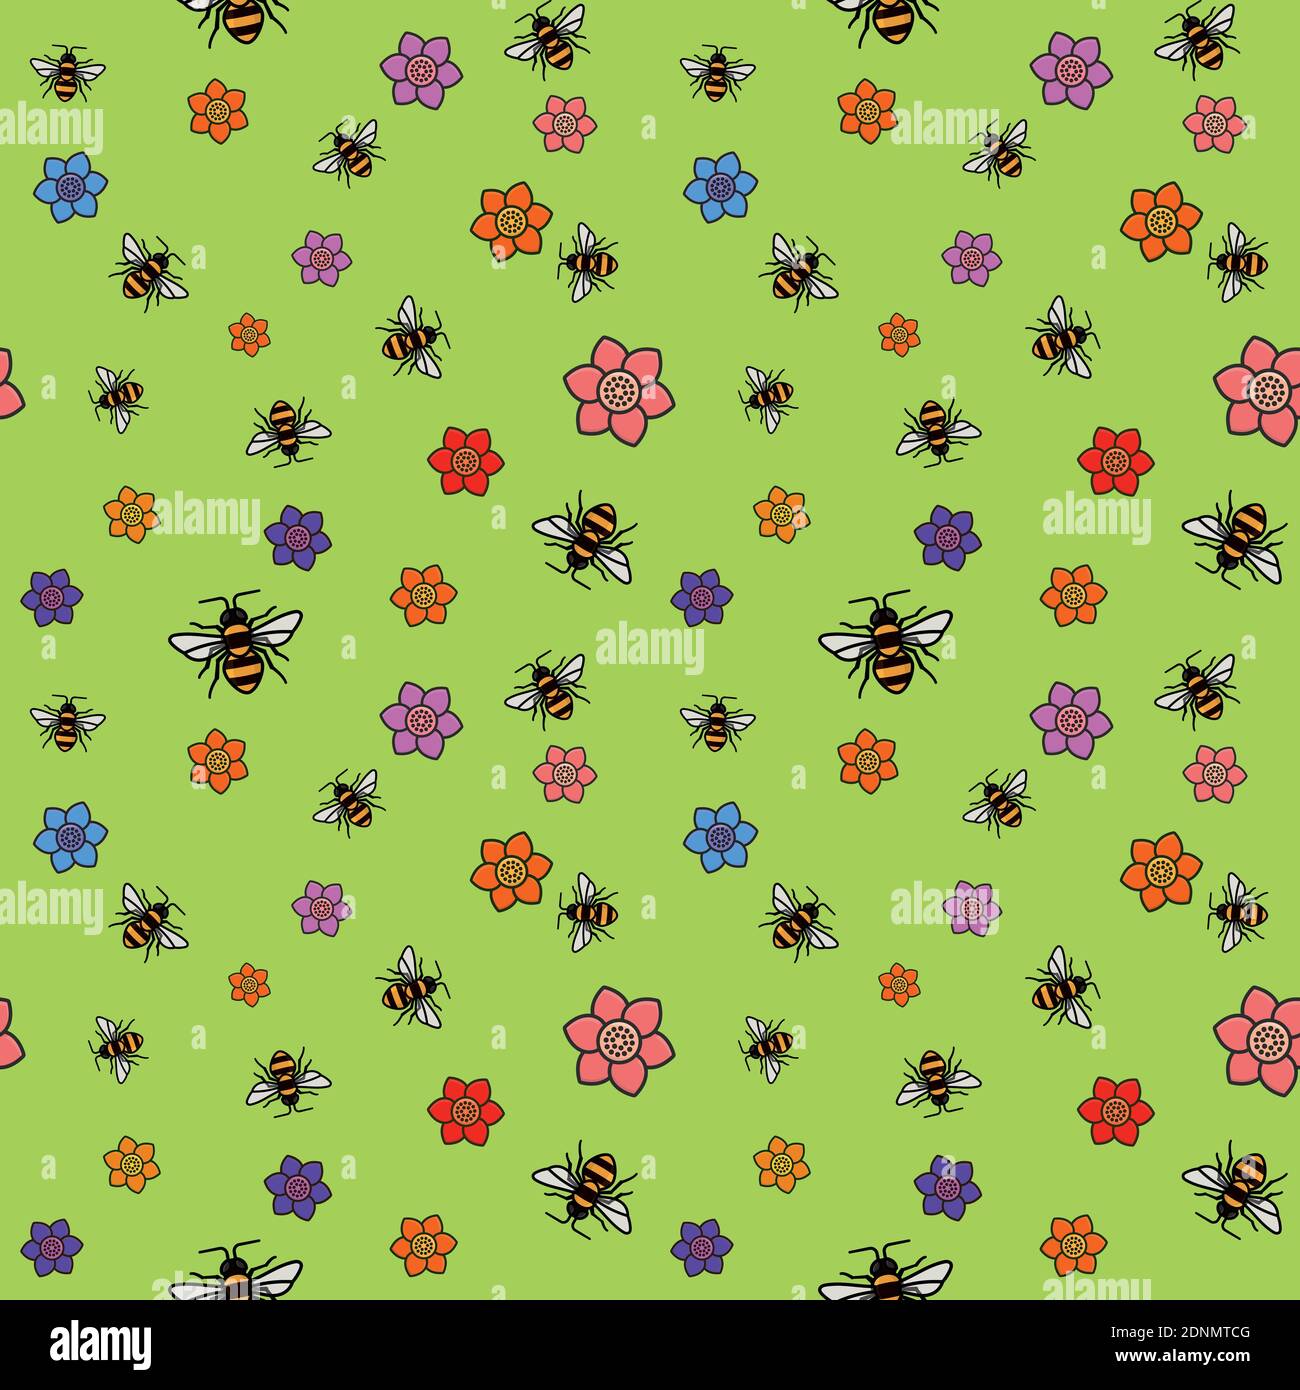 Seamless pattern with bees and flowers over green background. Vector nature wallpaper illustration Stock Vector